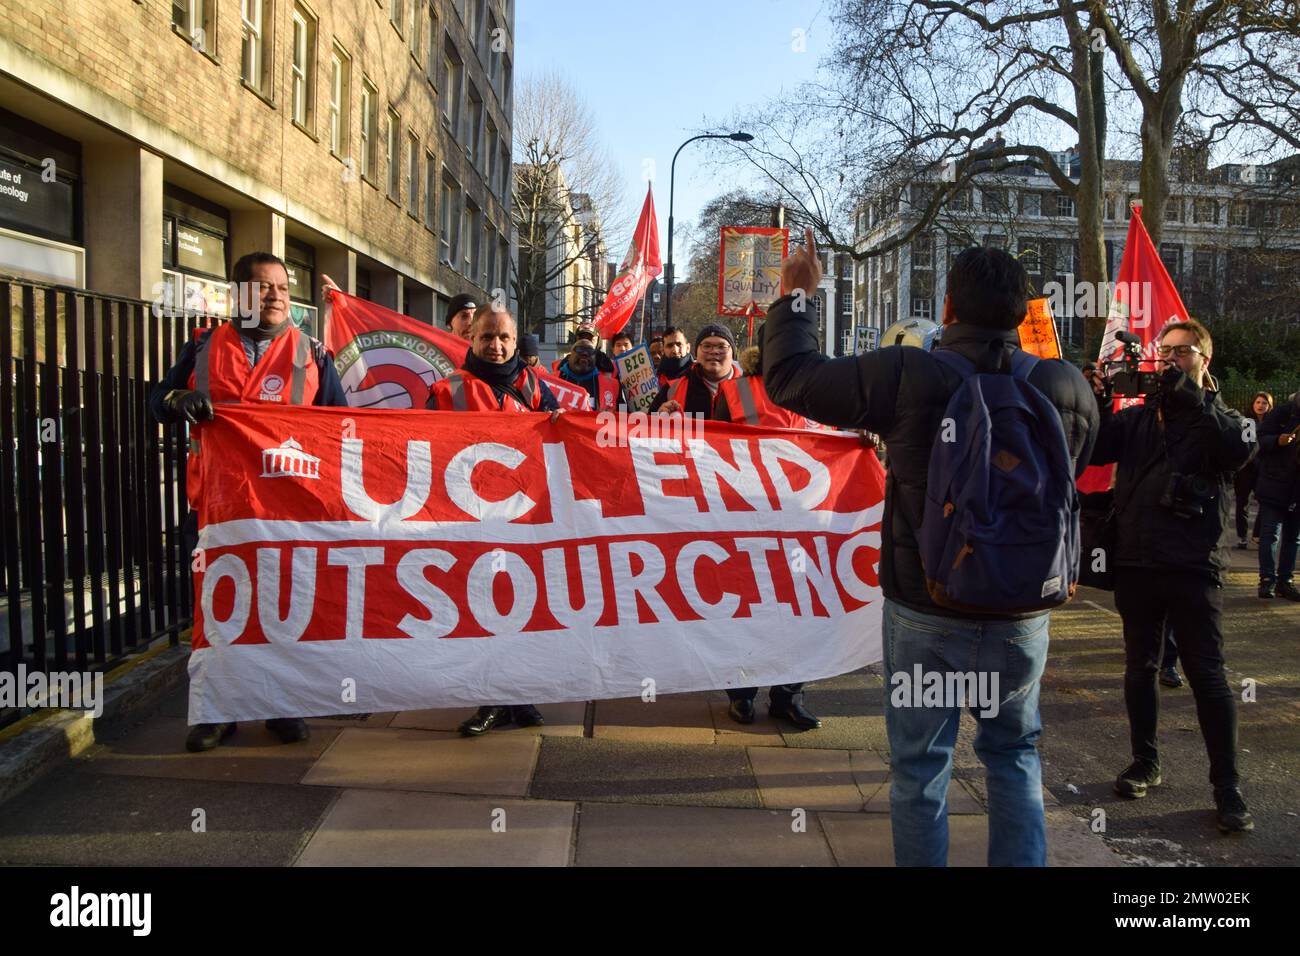 London, UK. 1st February 2023. Security guards working at University College London (UCL) stage a protest outside the university as they walk out over outsourcing and pay. The day has seen around half a million people staging walkouts around the UK, including teachers, university staff, public service workers and train drivers. Credit: Vuk Valcic/Alamy Live News Stock Photo